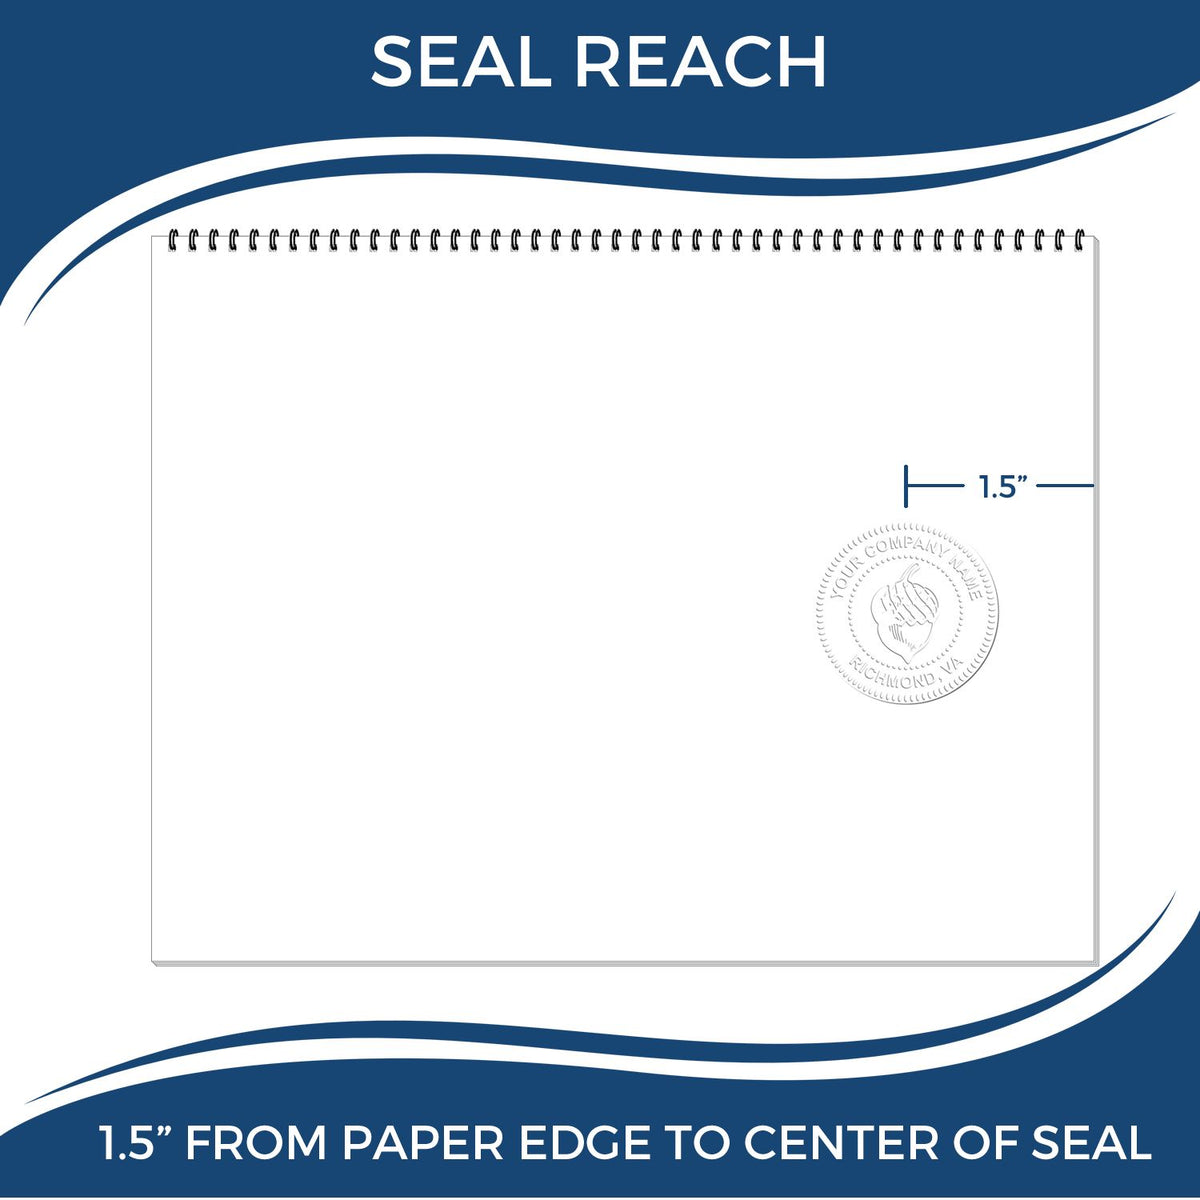 An infographic showing the seal reach which is represented by a ruler and a miniature seal image of the Gift Massachusetts Landscape Architect Seal